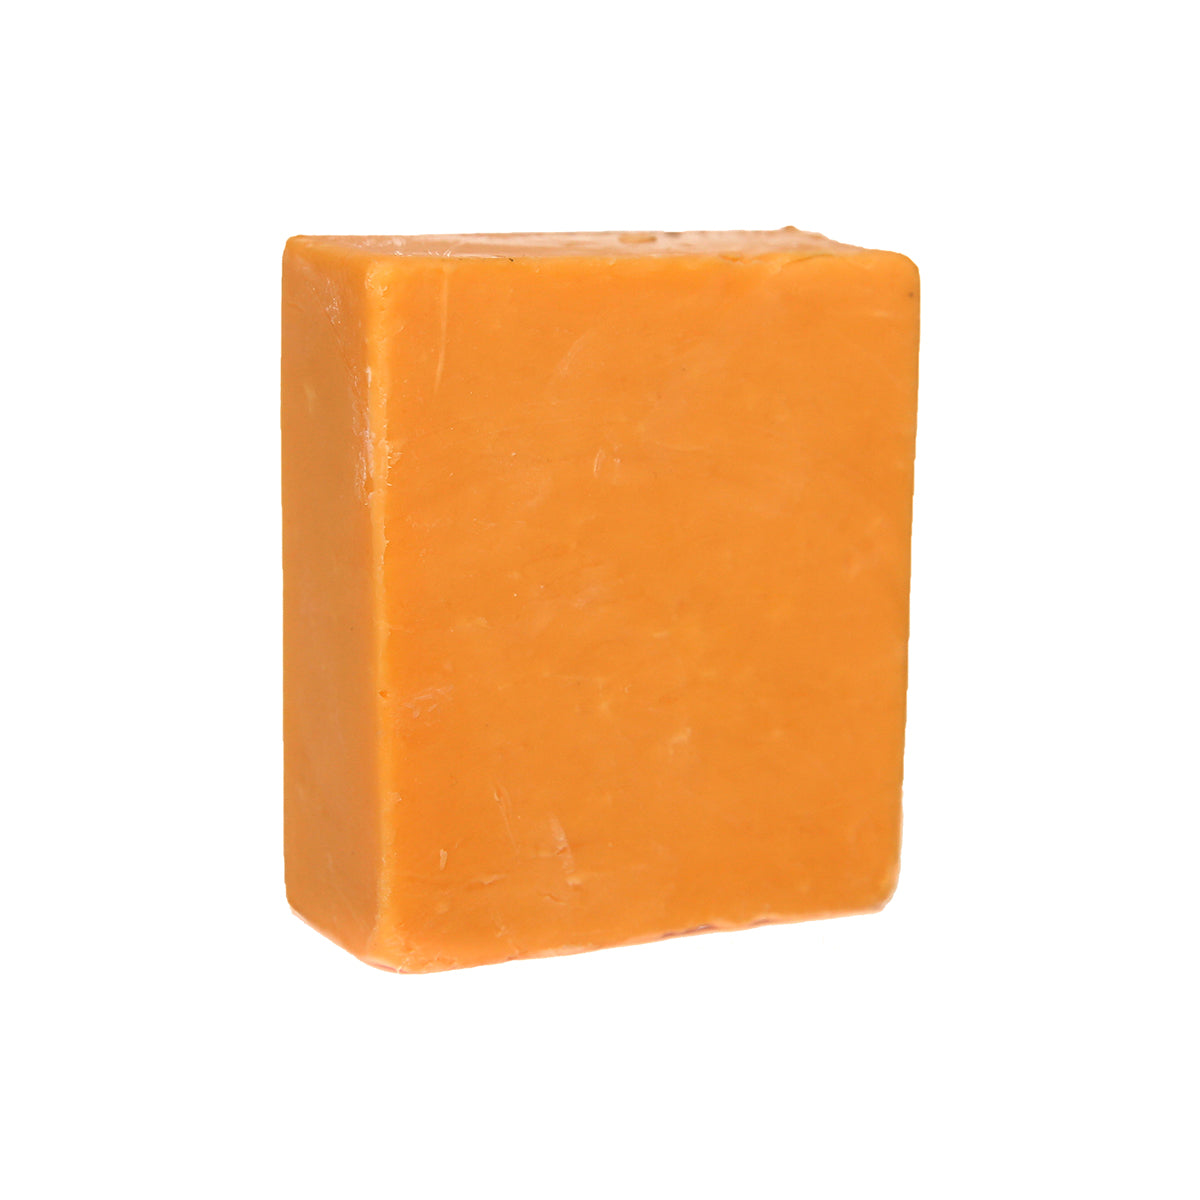 Murray'S Cheese New York State 6 Month Aged Yellow Cheddar